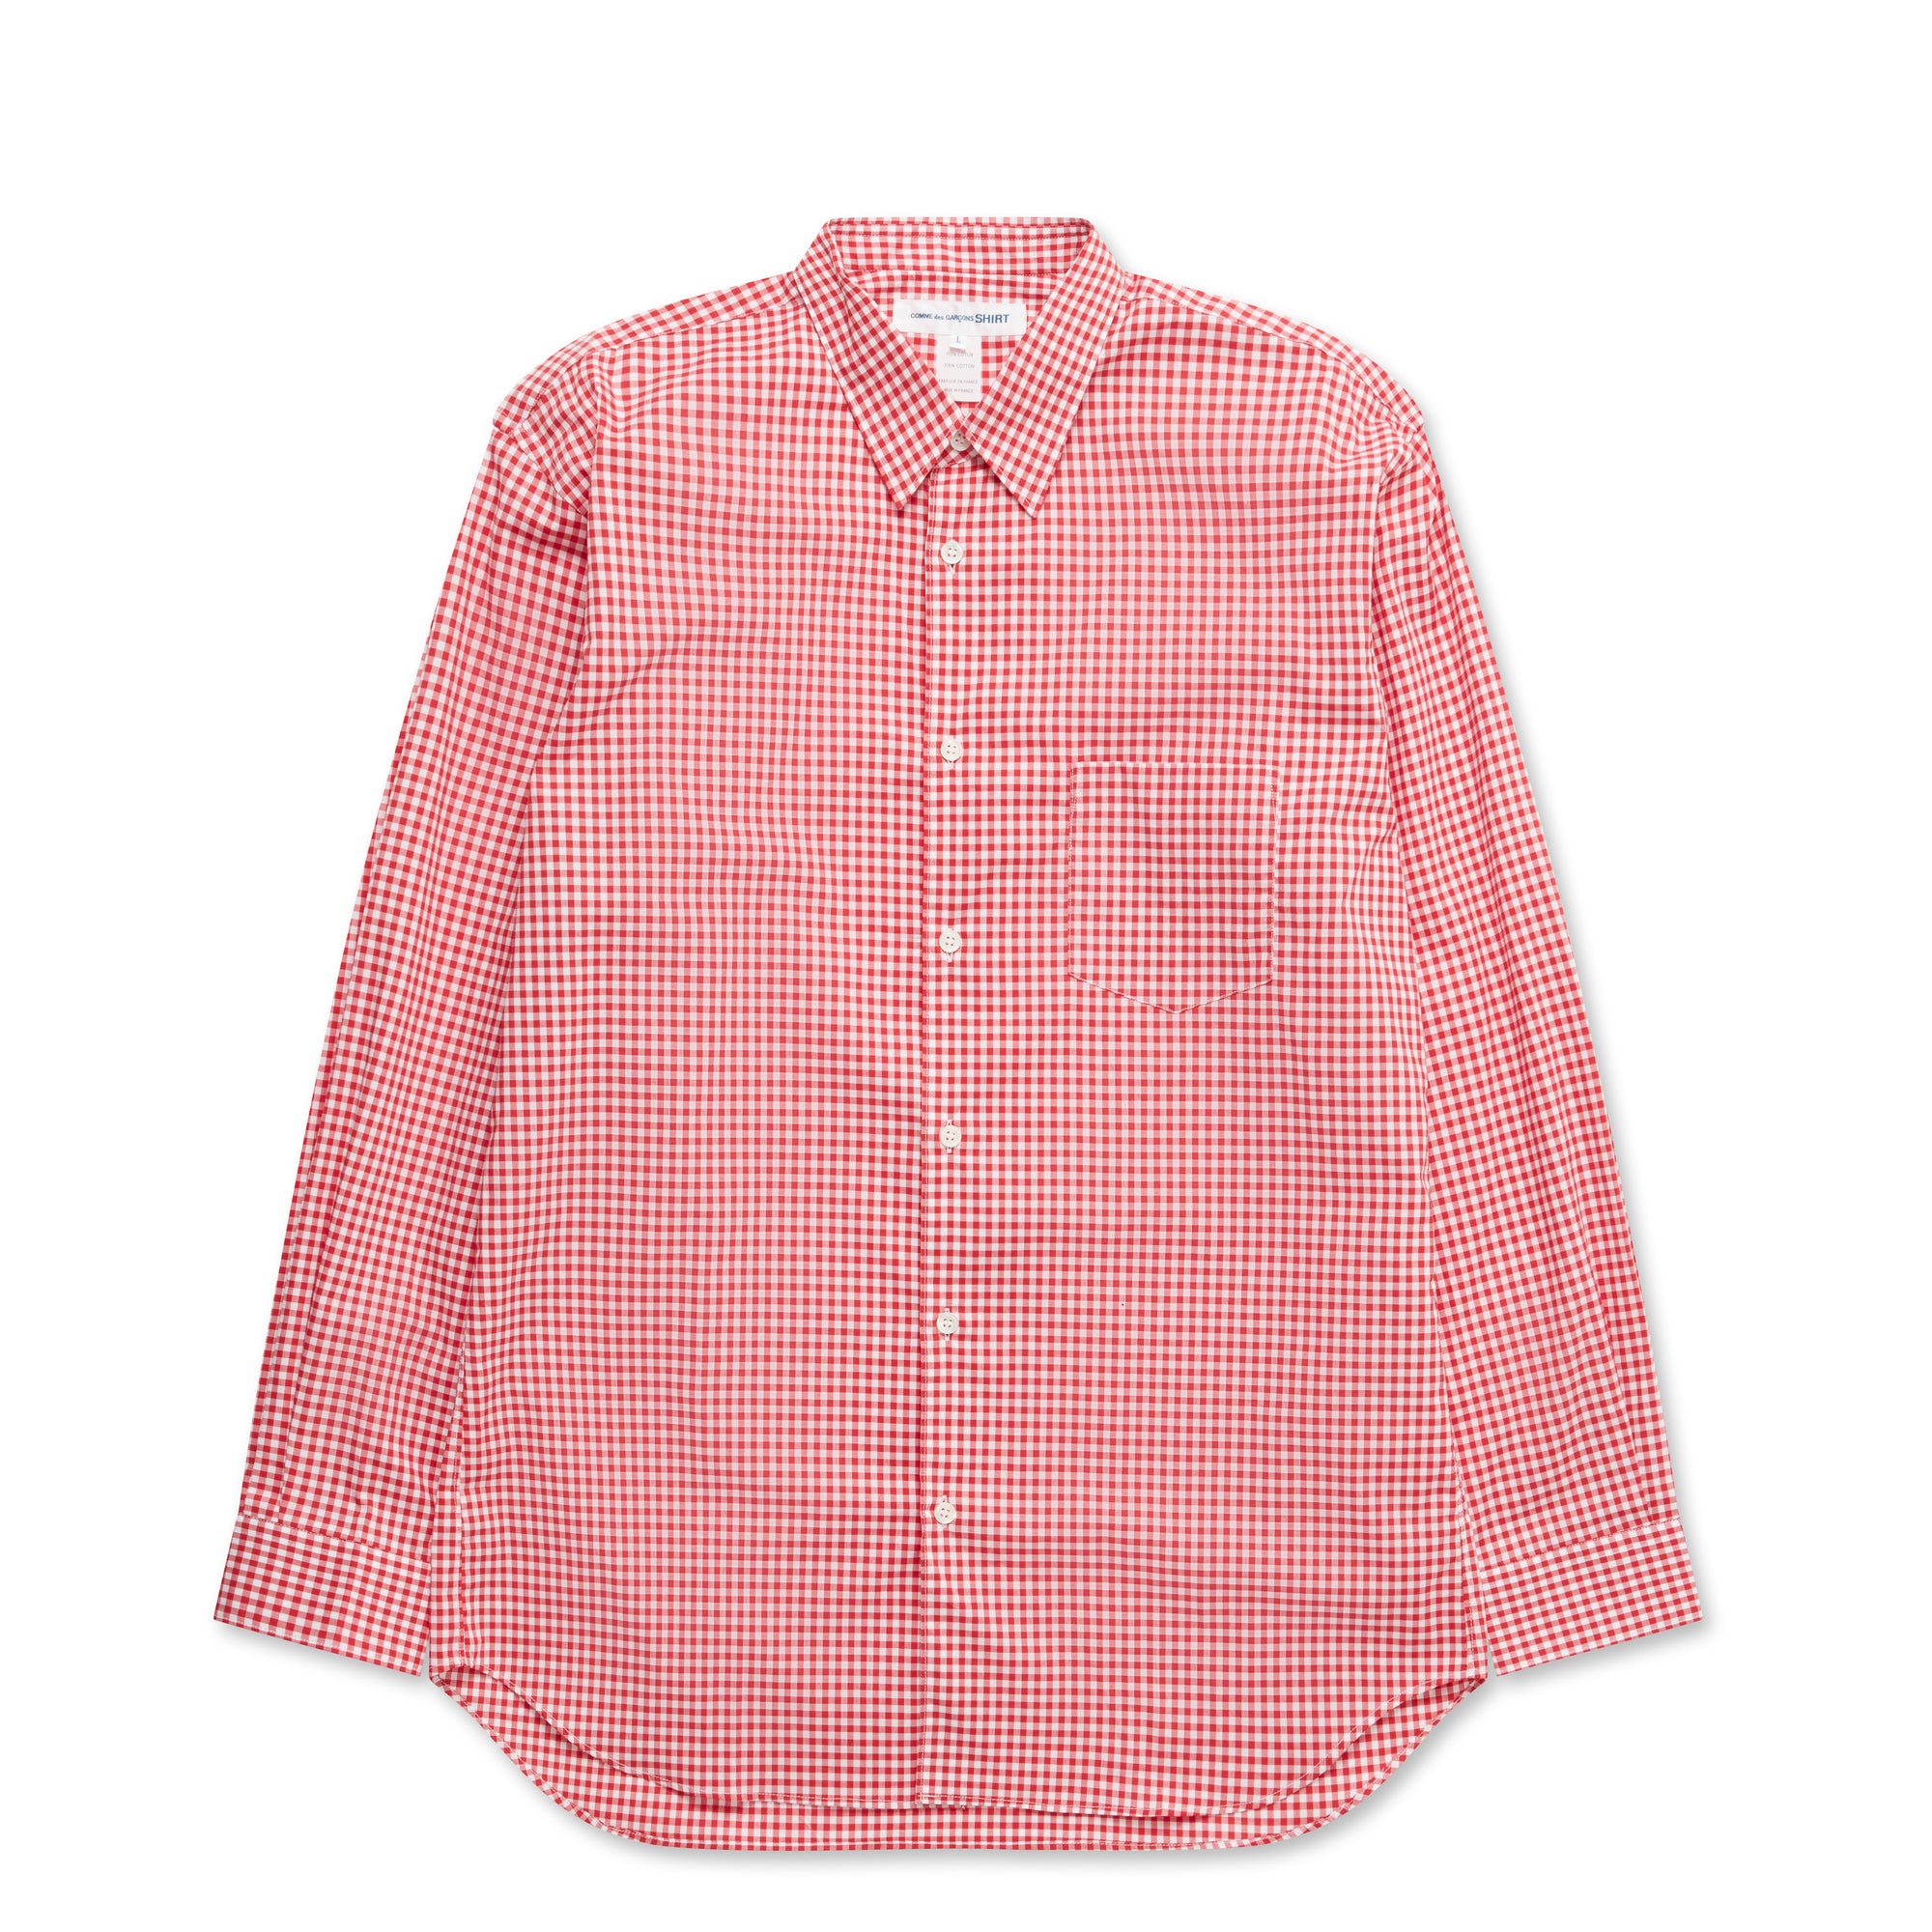 CDG Shirt Forever - Wide Fit Woven Cotton Gingham Shirt - (Red) view 5